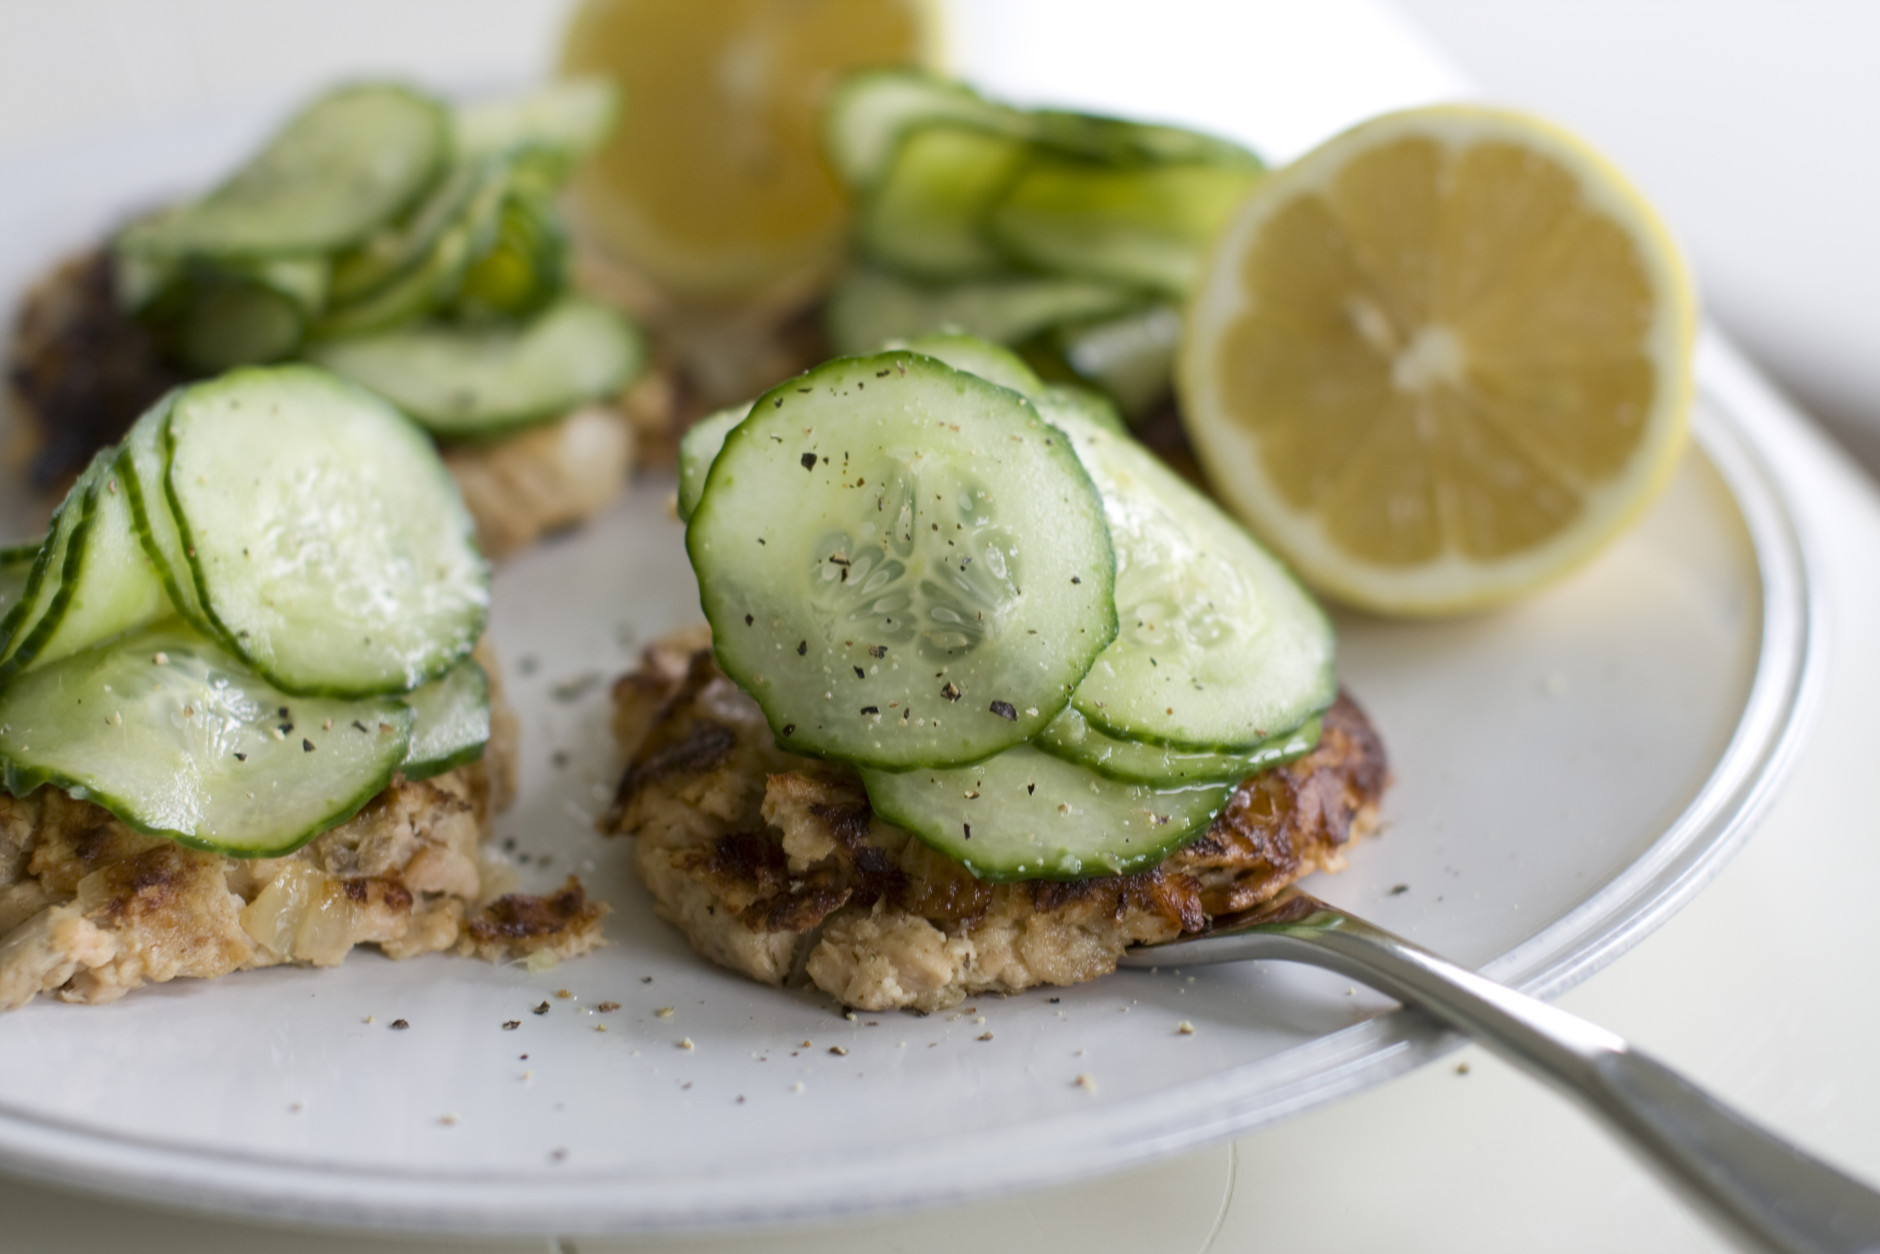 This July 22, 2013 photo shows wasabi-spiked salmon cakes with pickled cucumber in Concord, N.H. (AP Photo/Matthew Mead)